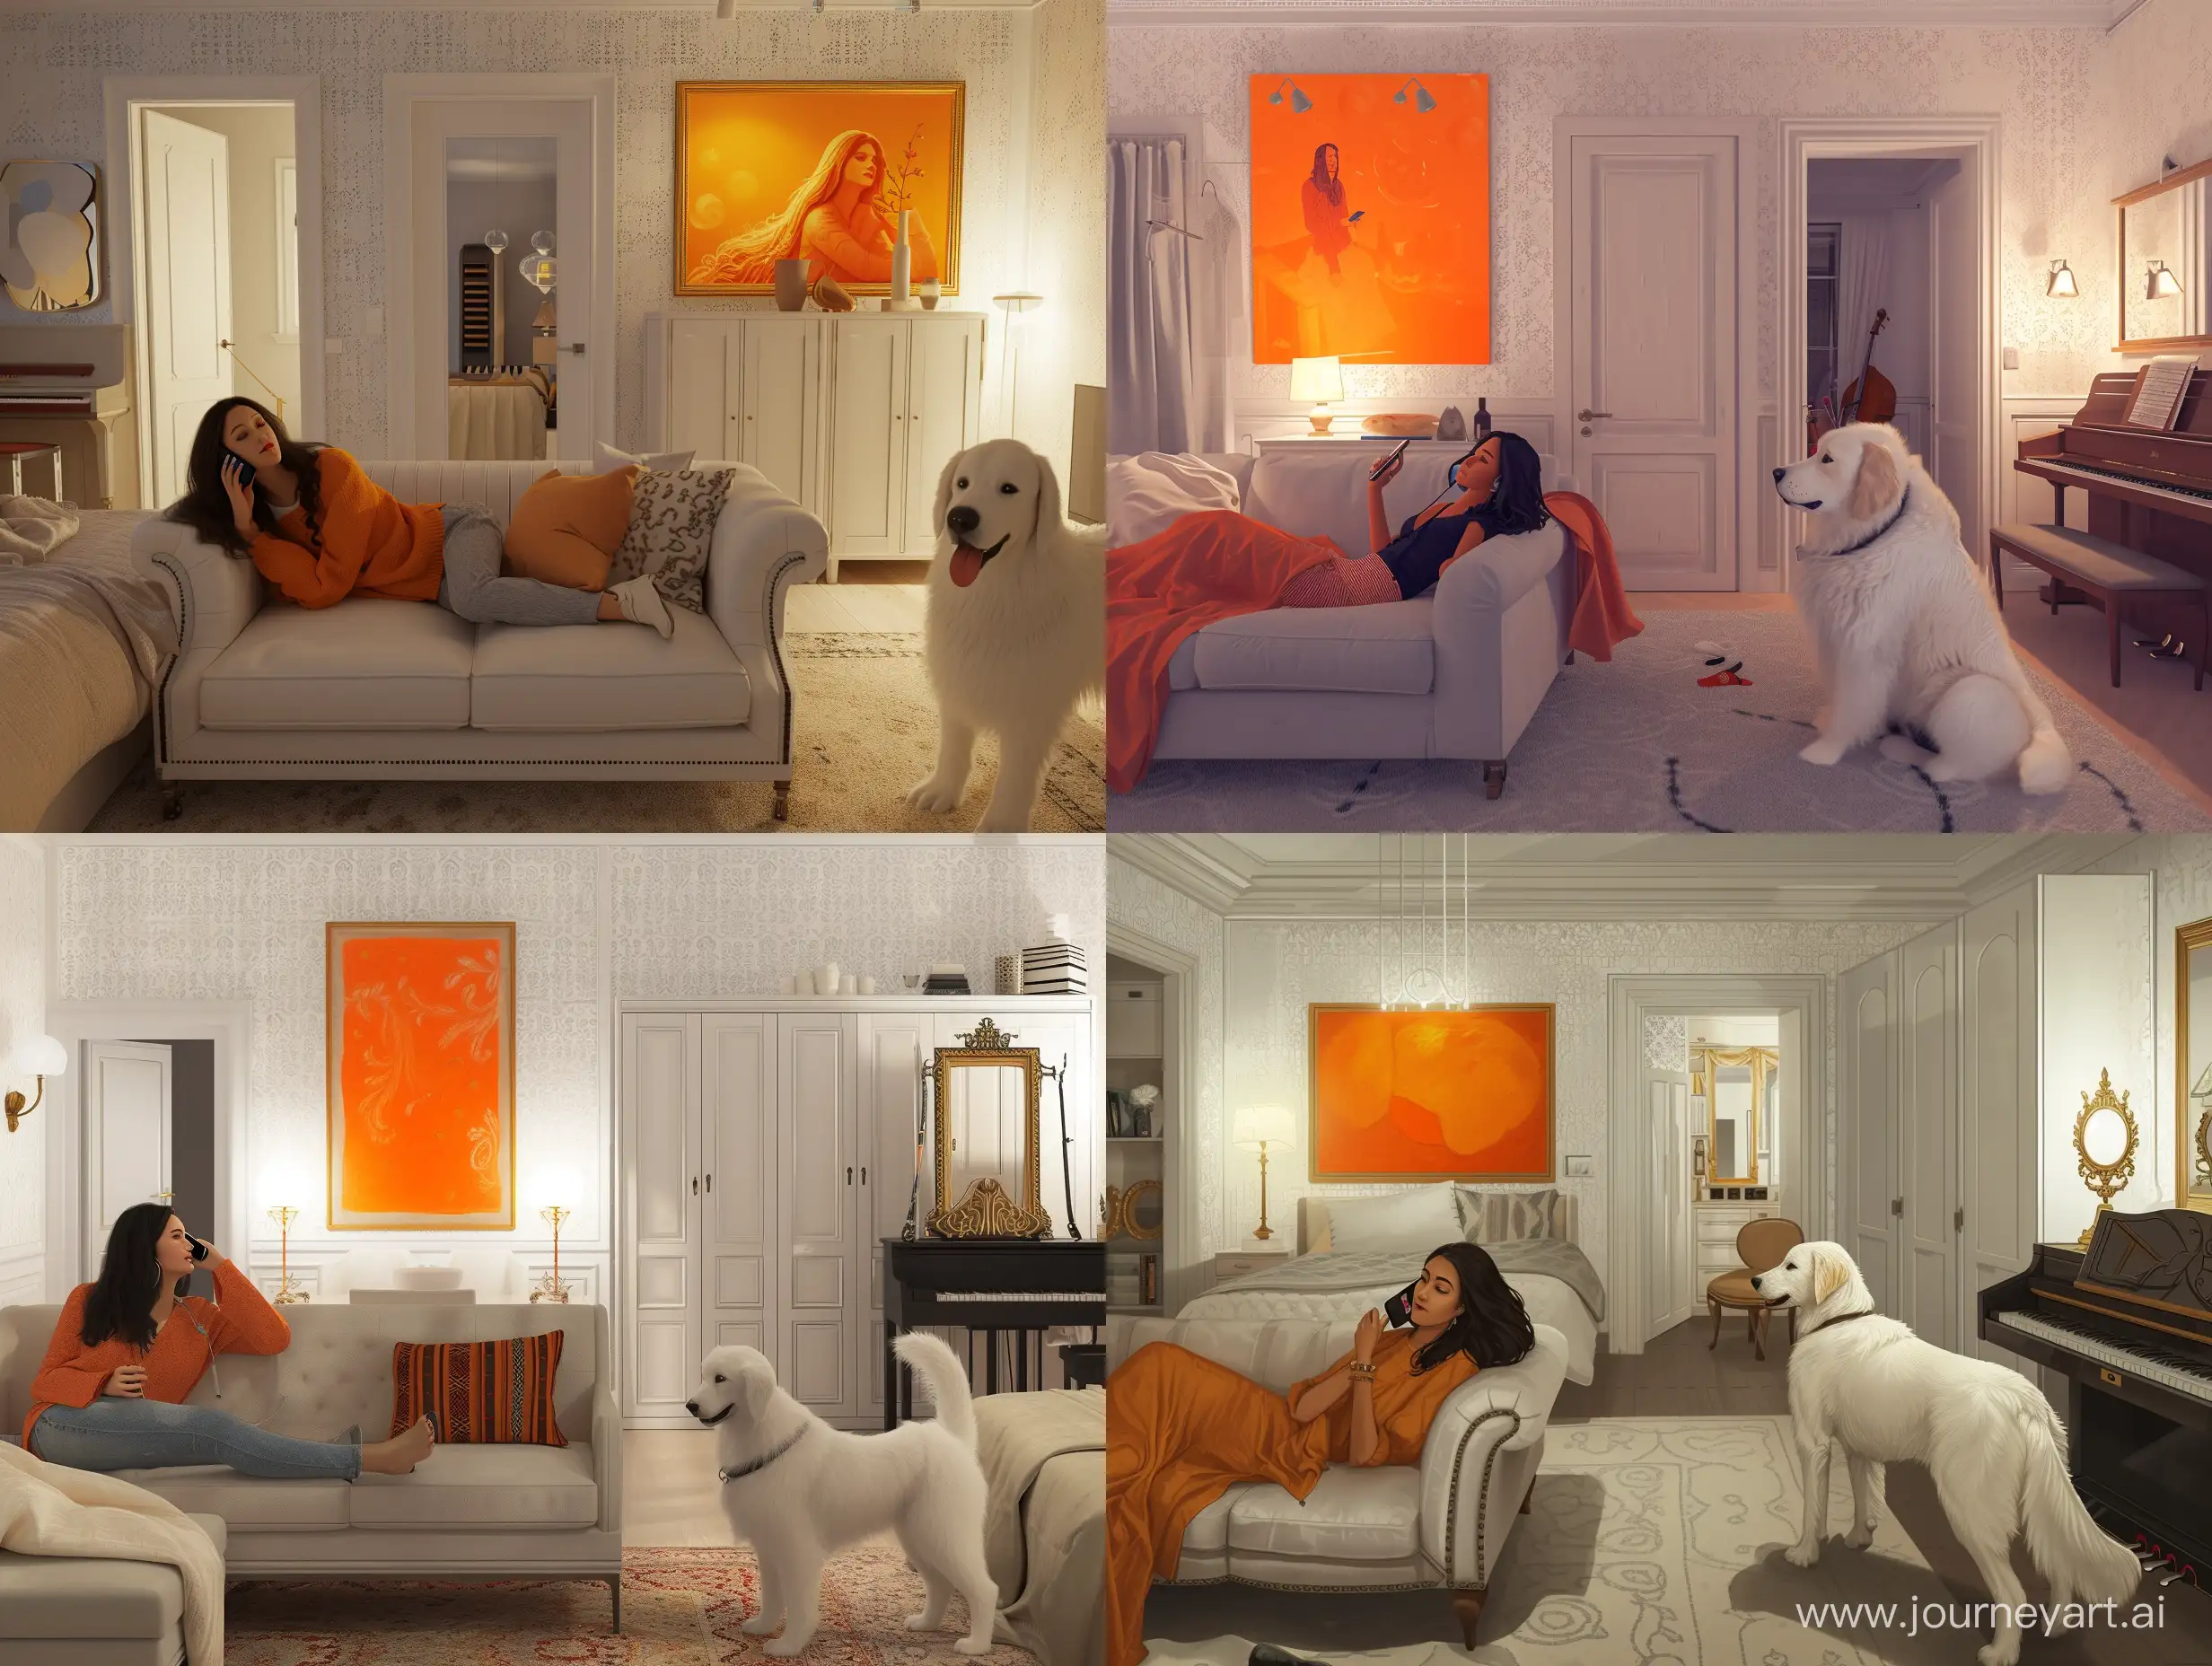 Evening-Scene-with-Woman-on-Sofa-Piano-and-Golden-Retriever-in-White-Room